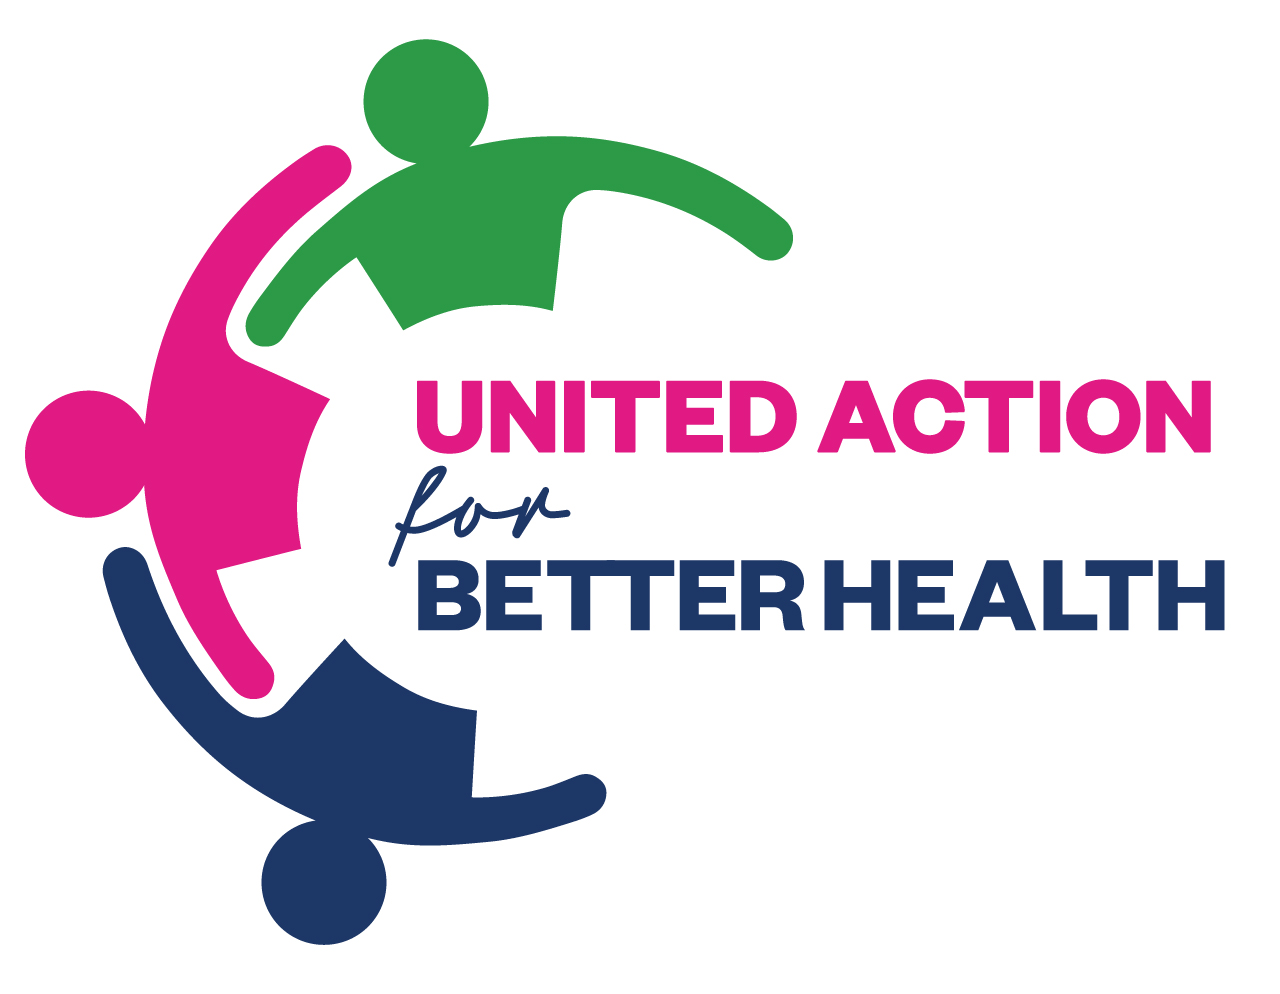 United Action for Better Health